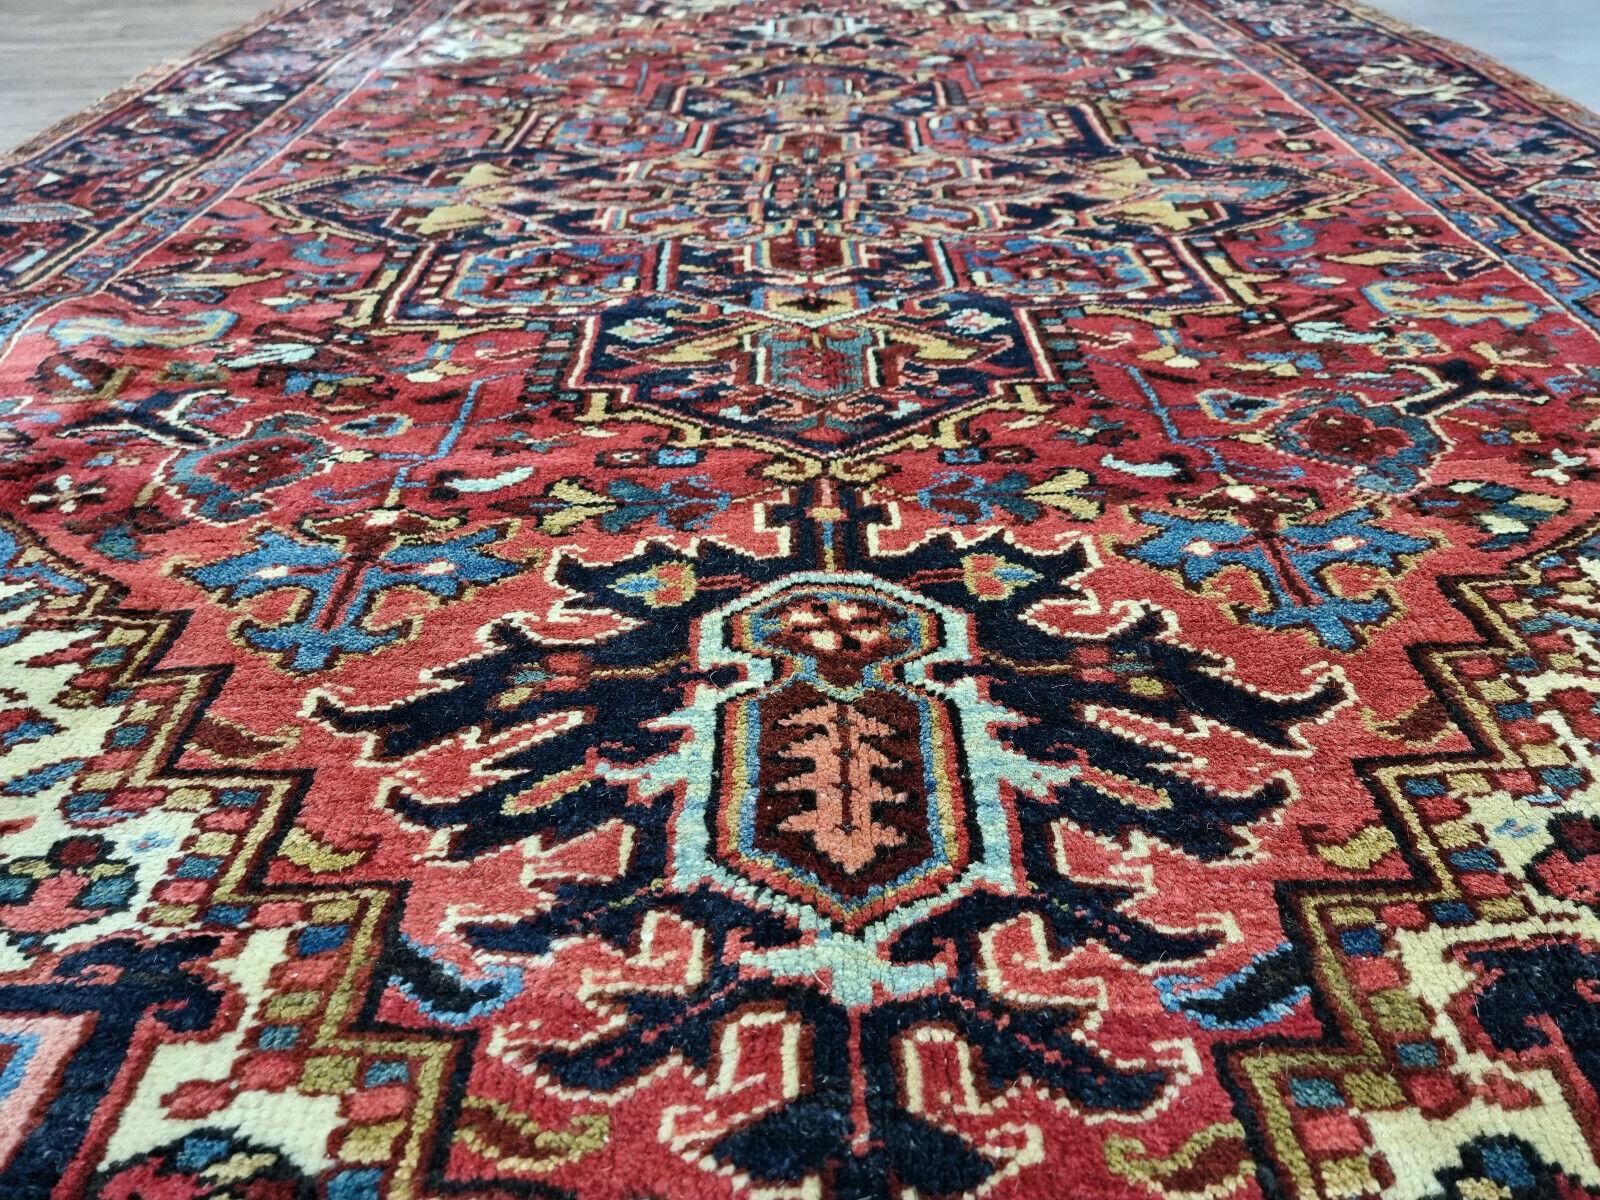 Handmade Antique Persian Style Heriz Rug (5.5’ x 8.8’):

Design and Craftsmanship:
This exquisite rug showcases intricate patterns and designs, reminiscent of traditional Persian artistry.
The central area features a dominant deep blue color,